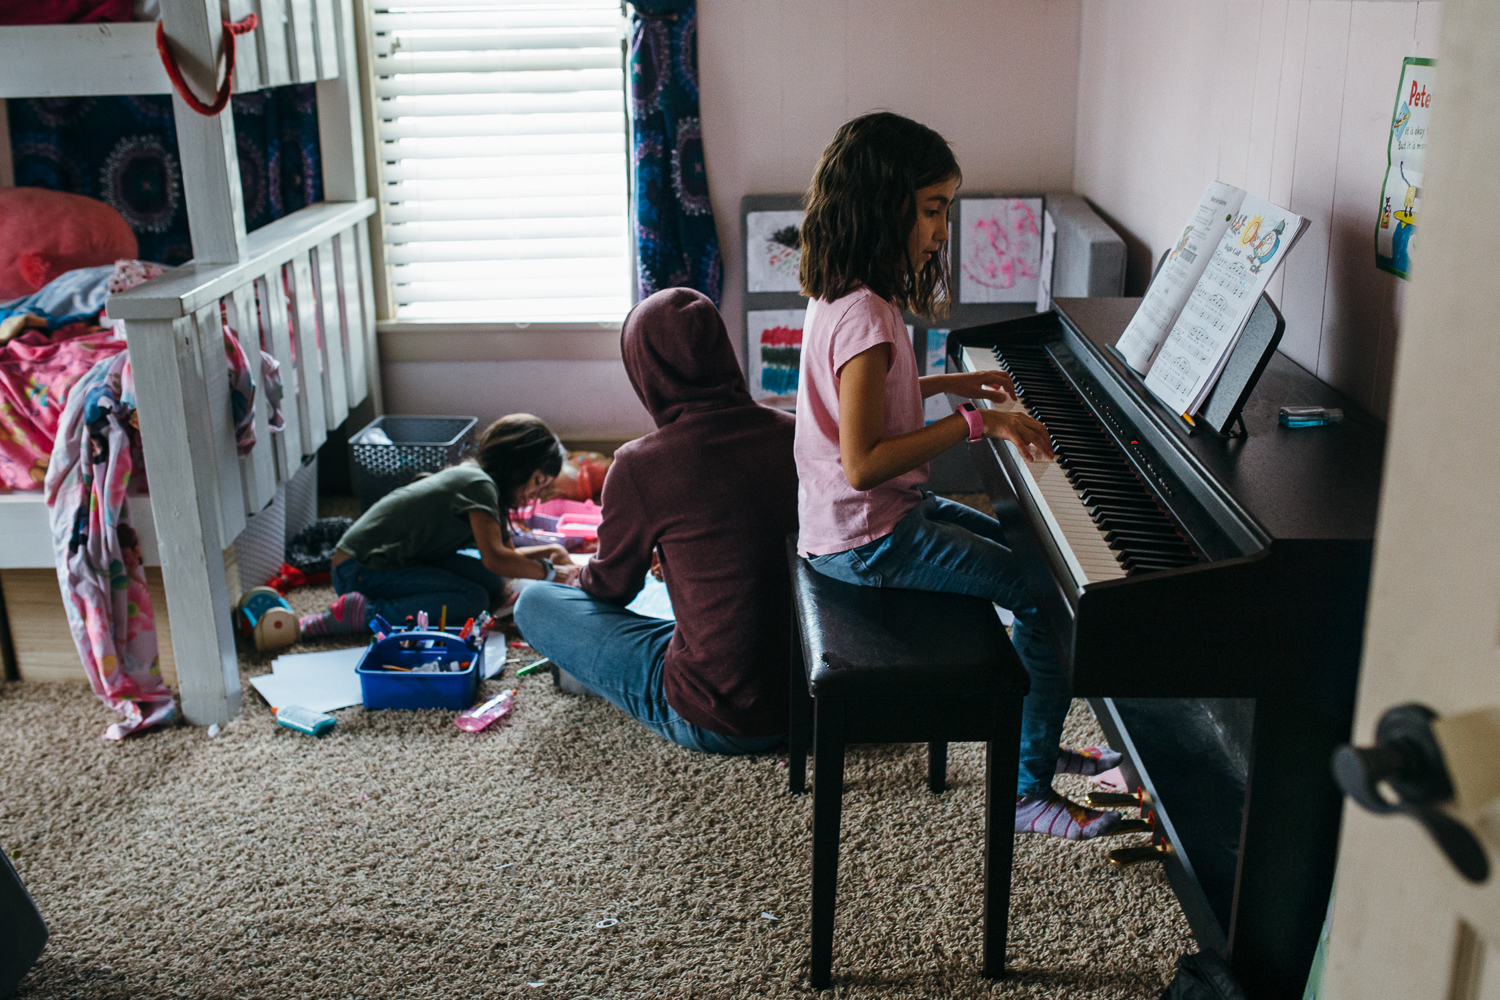 a young girl plays the piano while another girl sits on the bedroom floor coloring